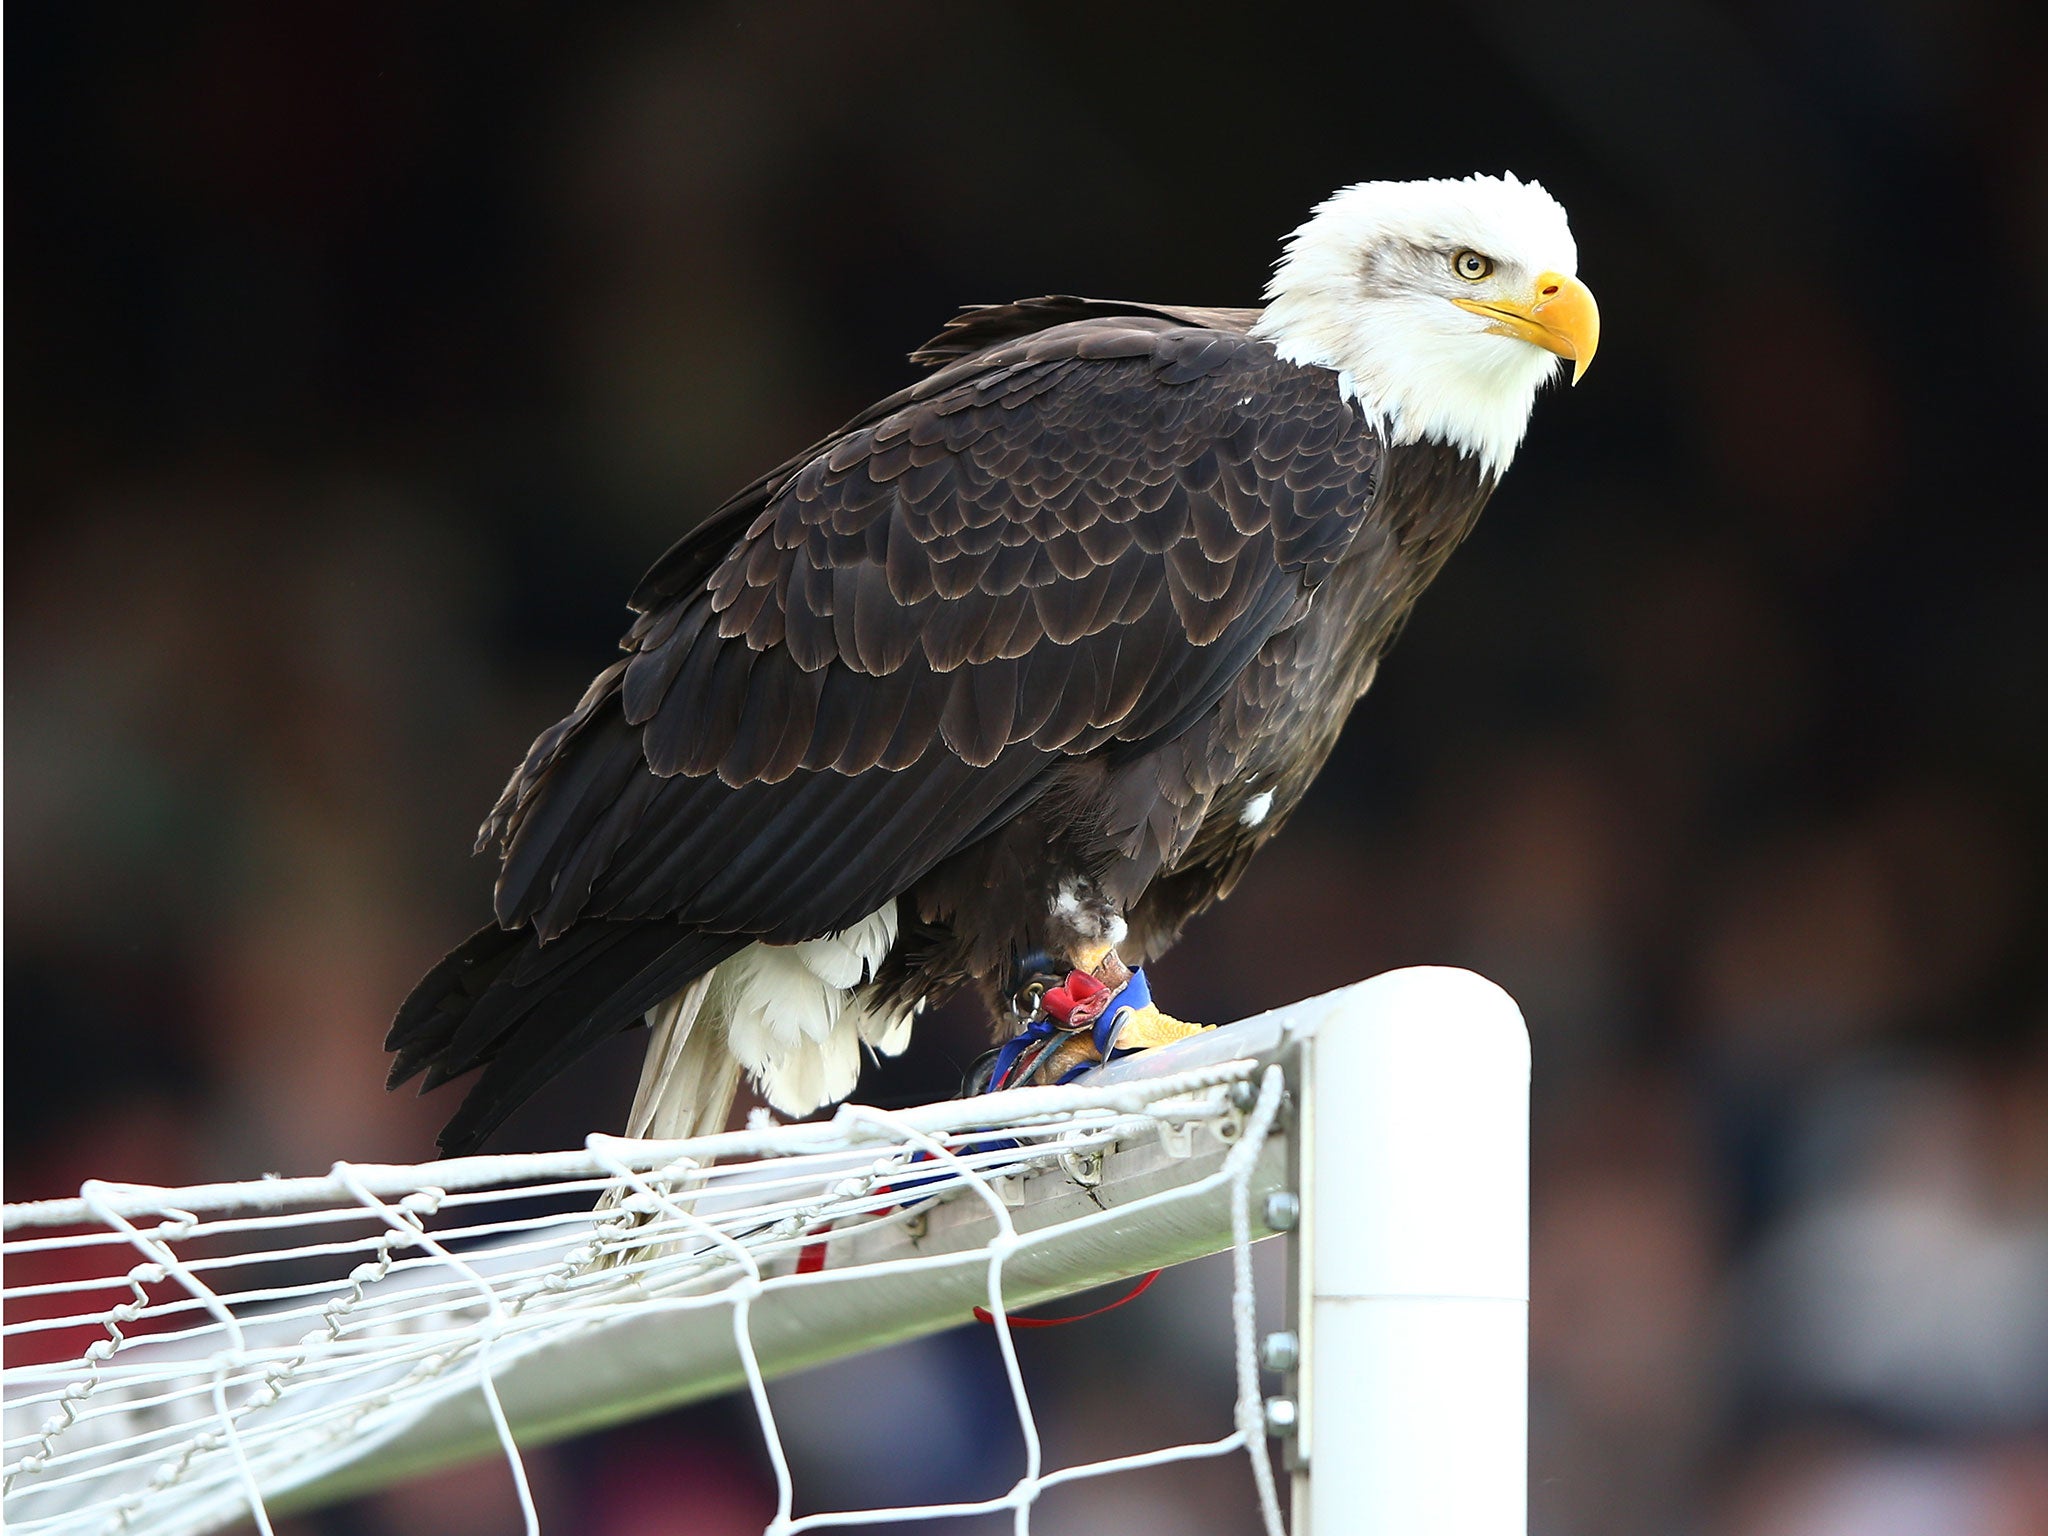 Kayla, the Crystal Palace eagle perches on the crossbar prior to the Barclays Premier League match between Crystal Palace and Manchester United at Selhurst Park on May 9, 2015